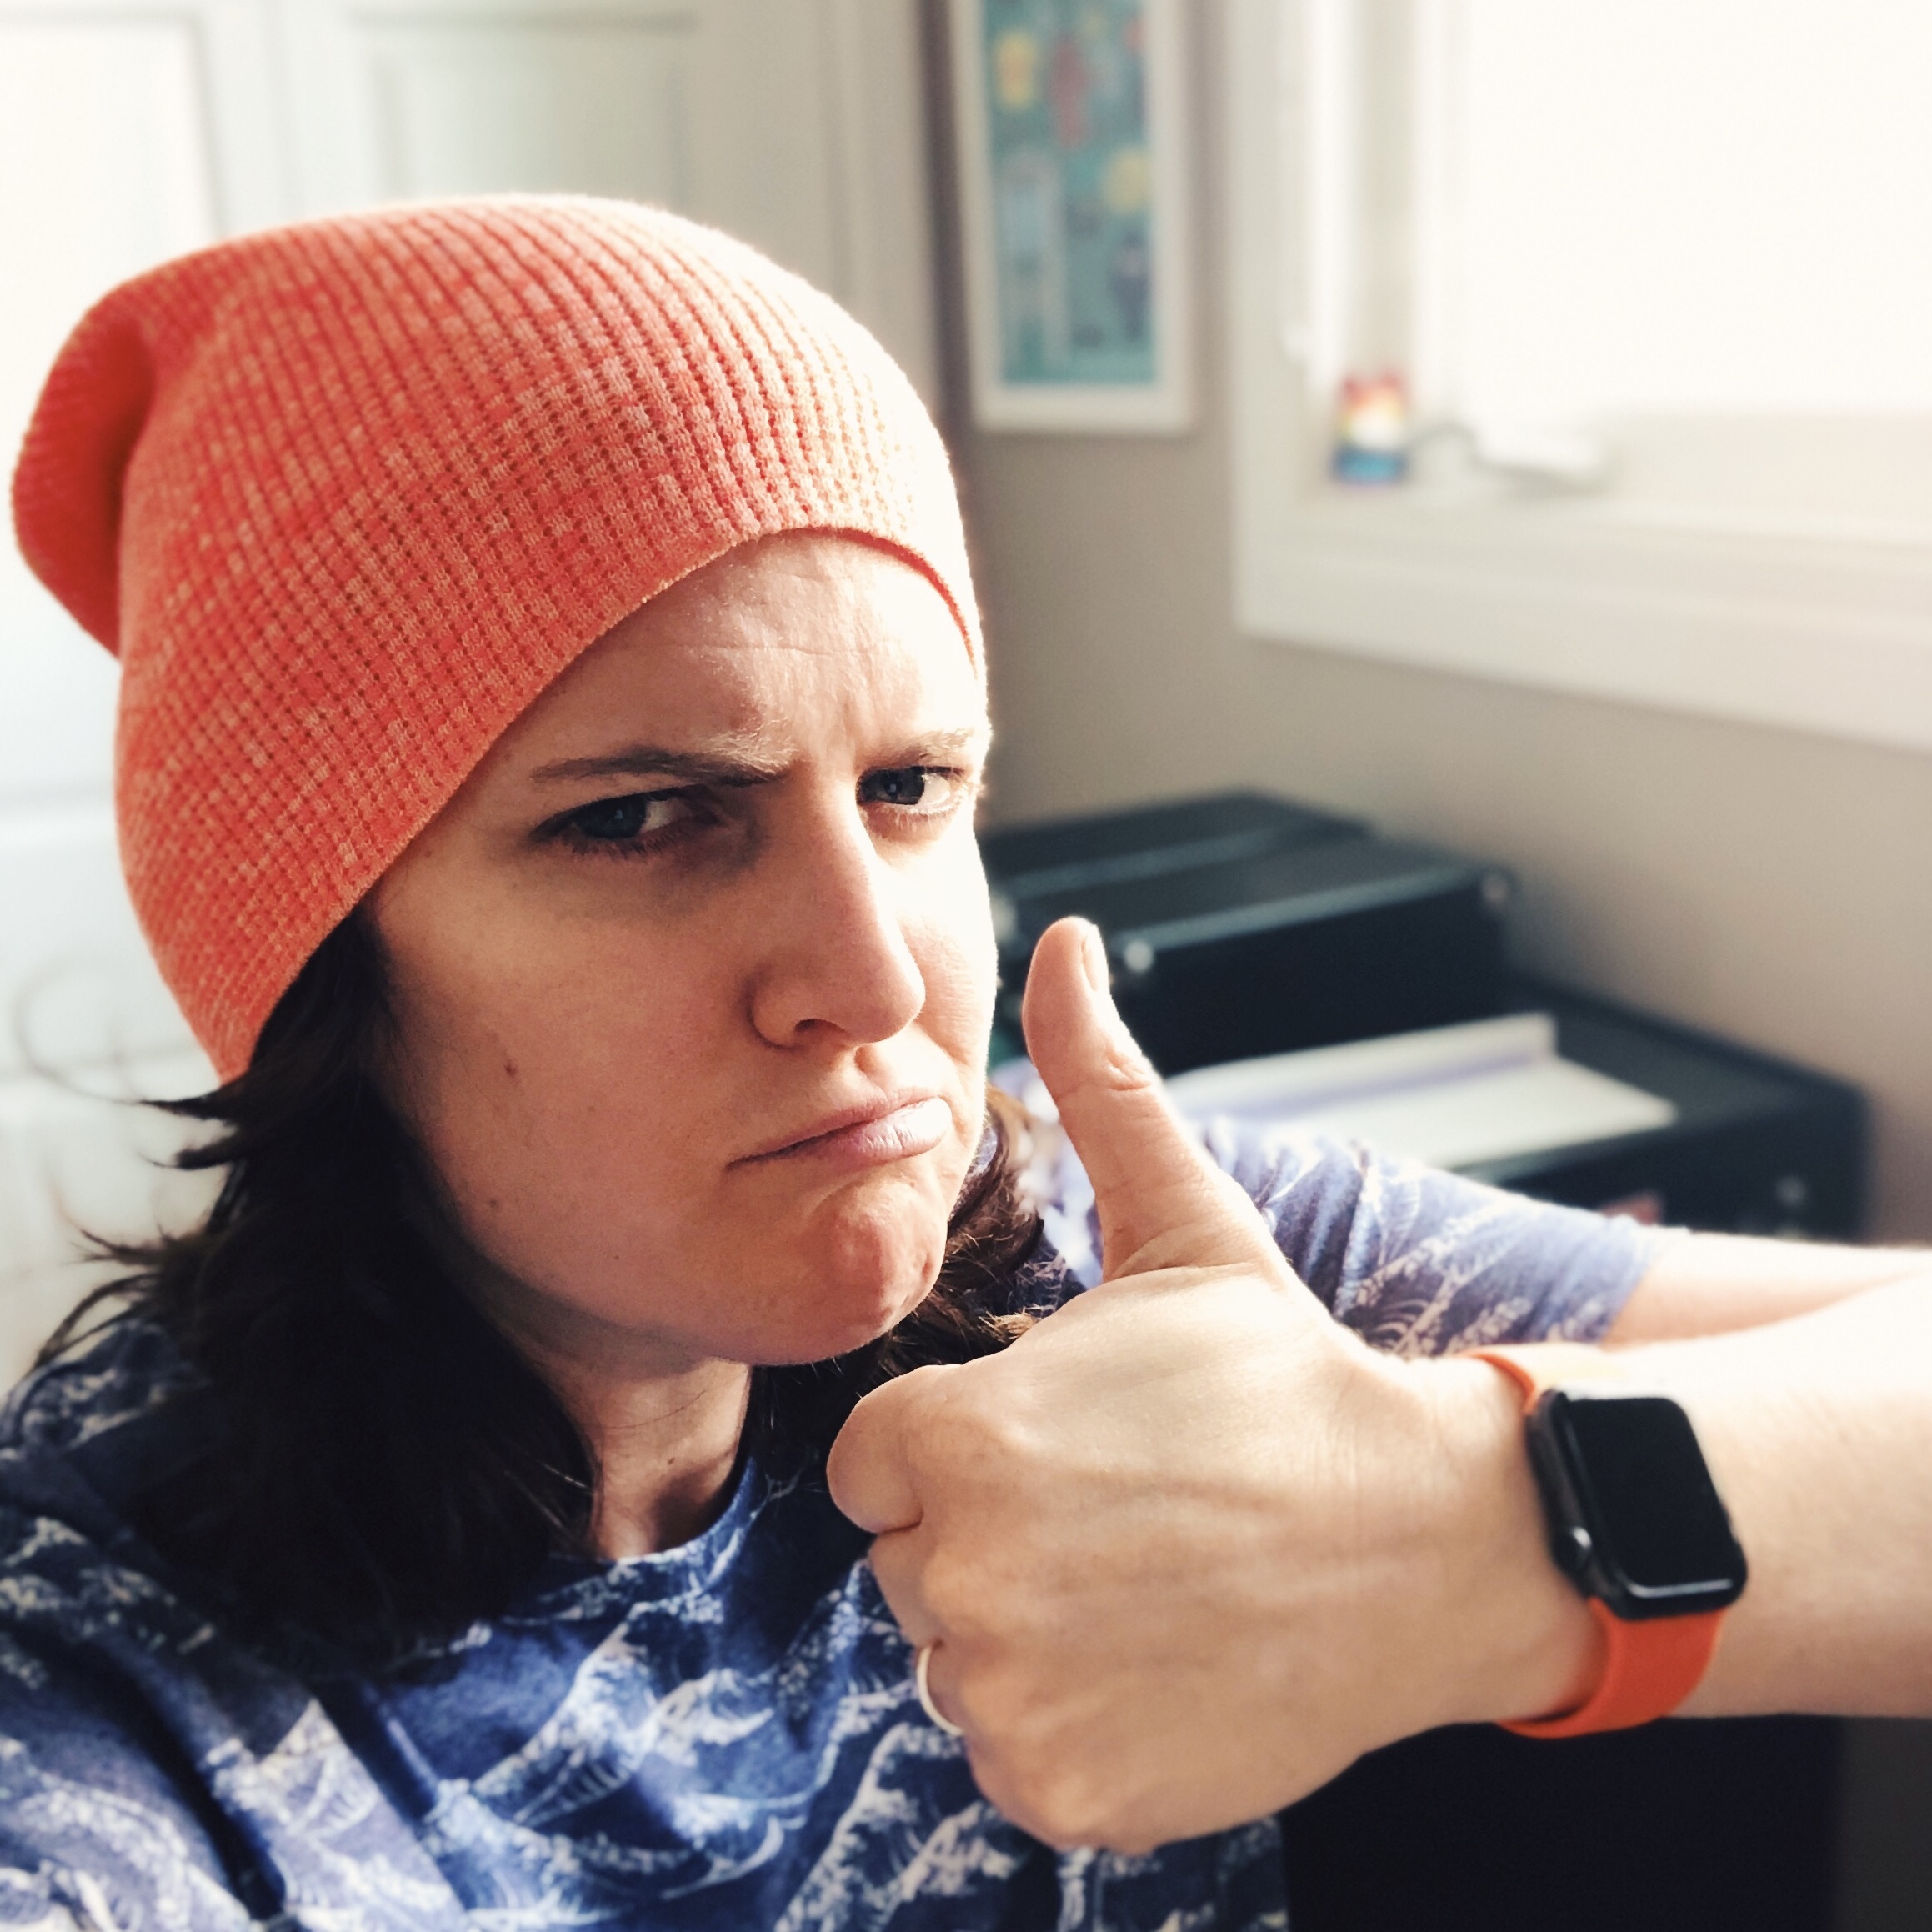 Emma gives the thumbs up sign while wearing a orange toque